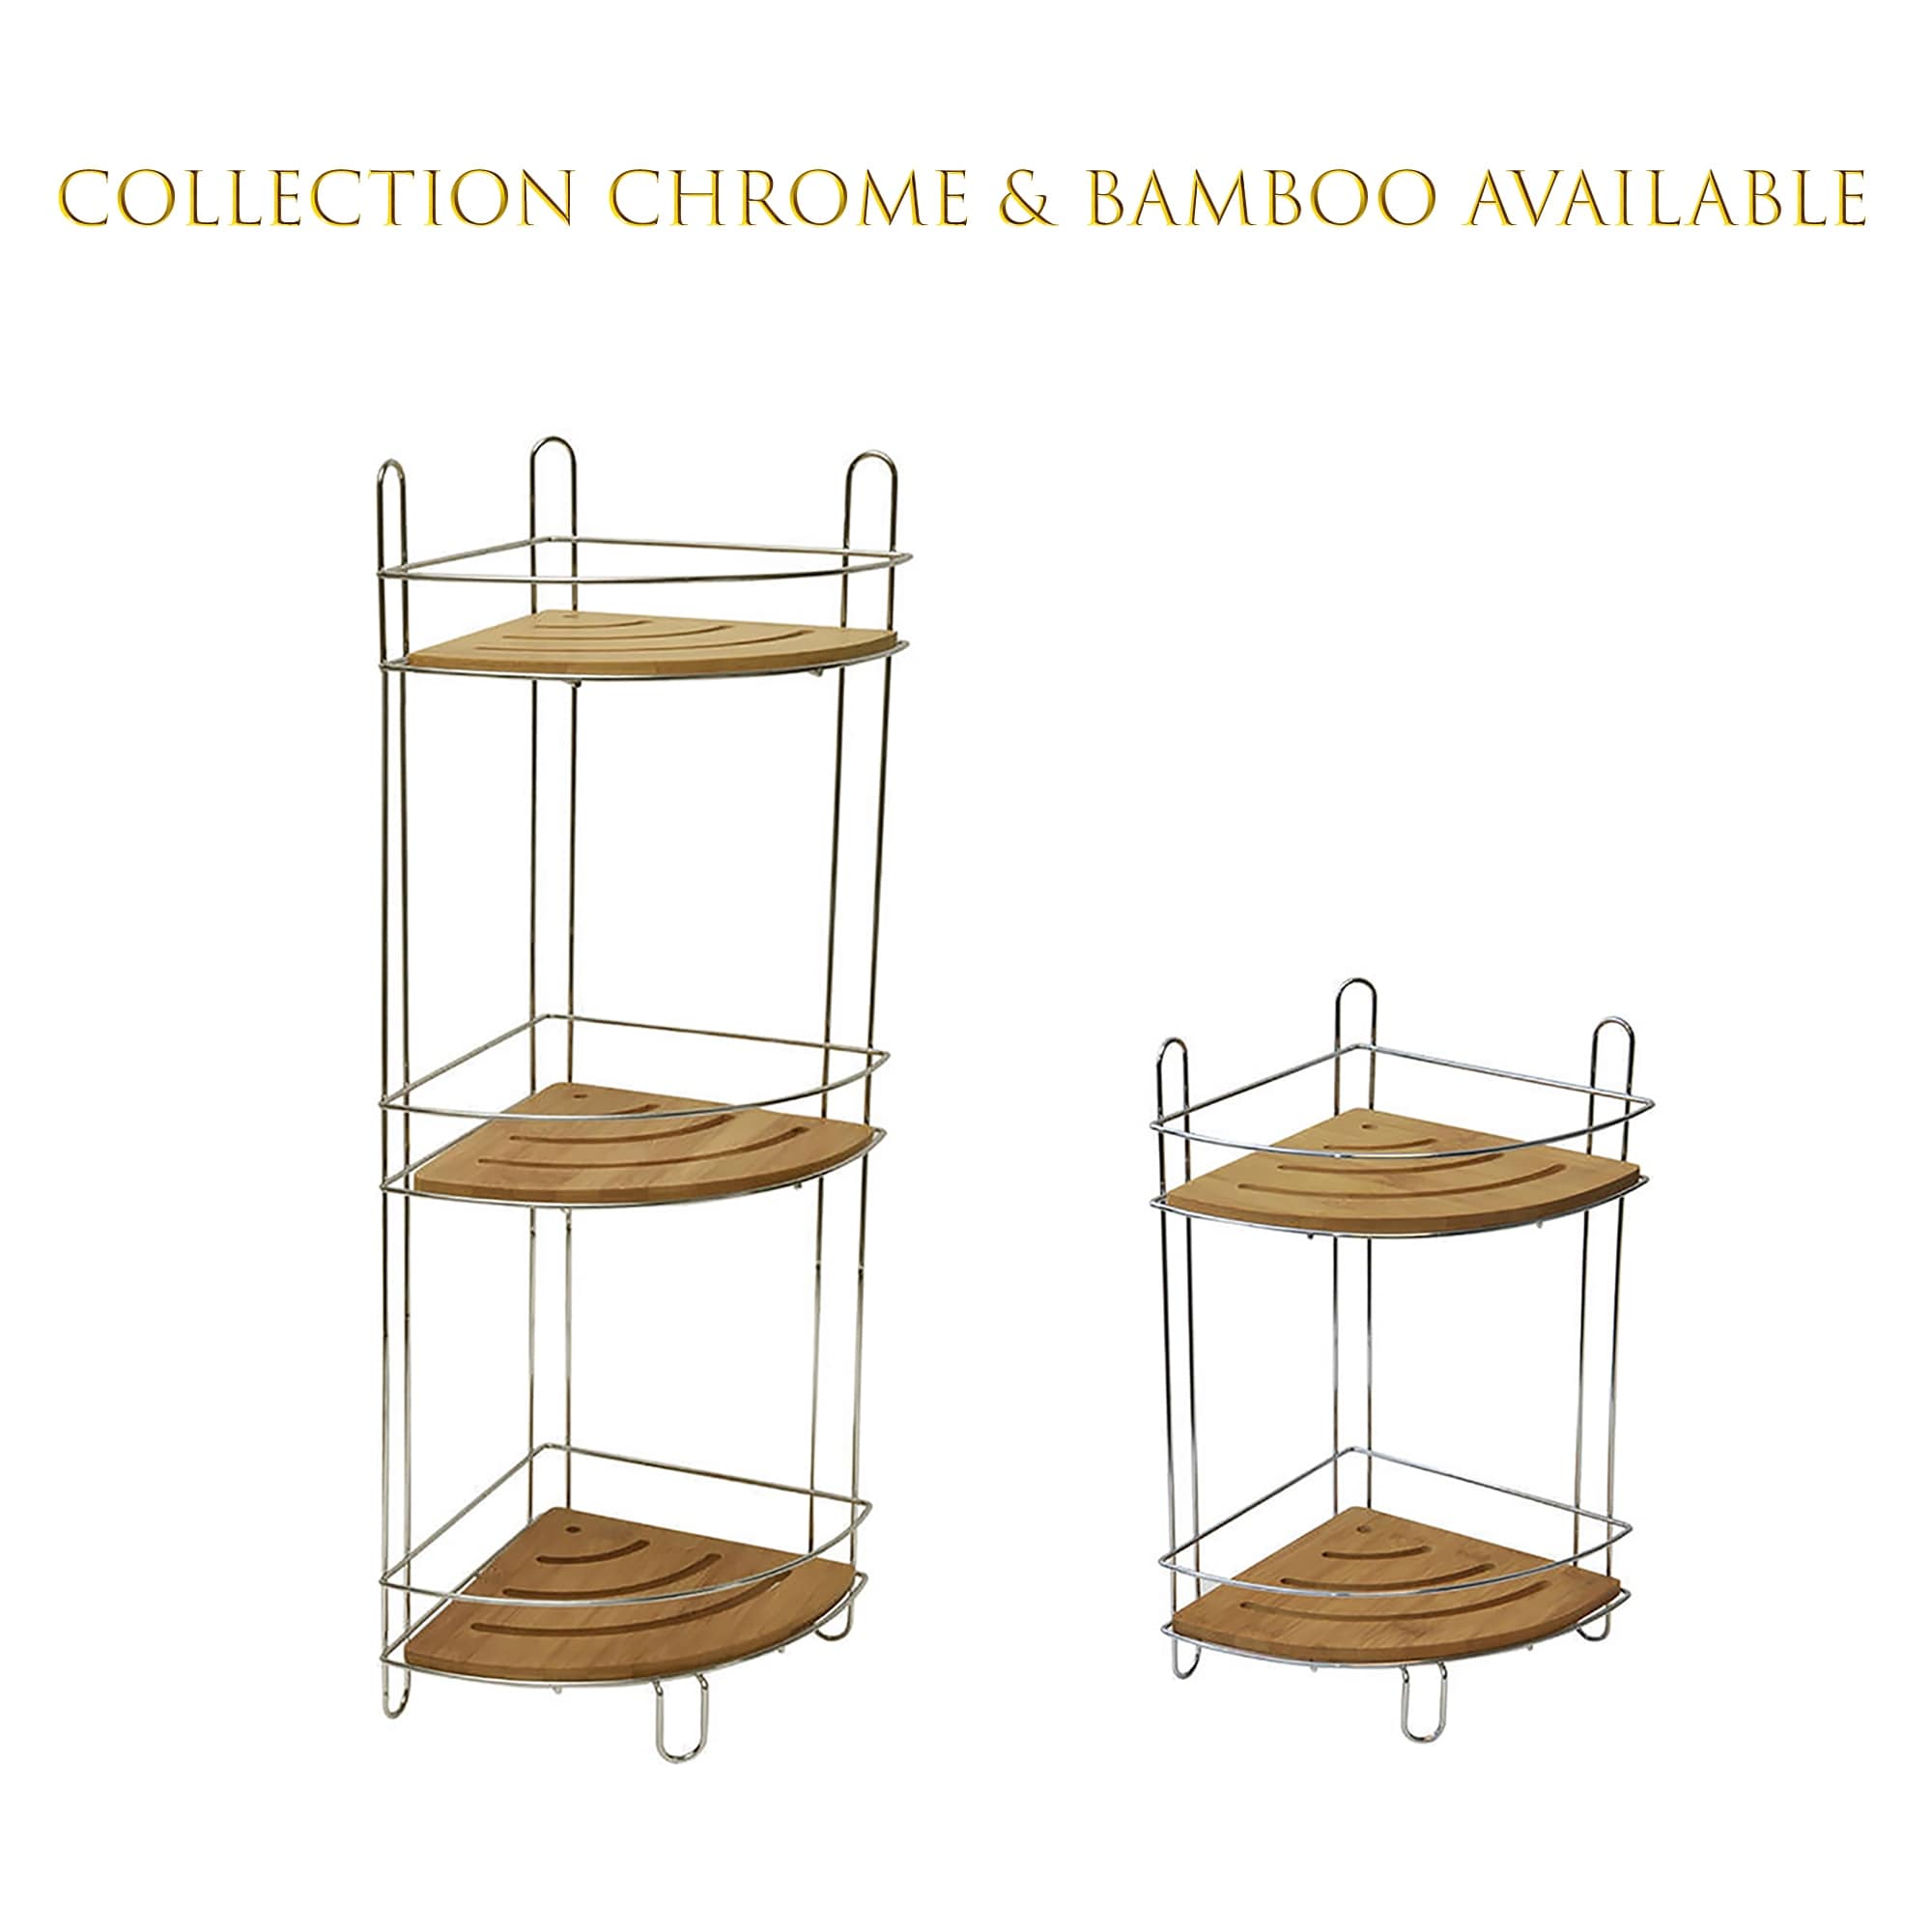 https://ak1.ostkcdn.com/images/products/is/images/direct/b9f72417a53bafaf1d3ecd150b4afce6f76aac02/Organizer-Metal-Wire-Corner-Shower-Caddy-Bamboo.jpg